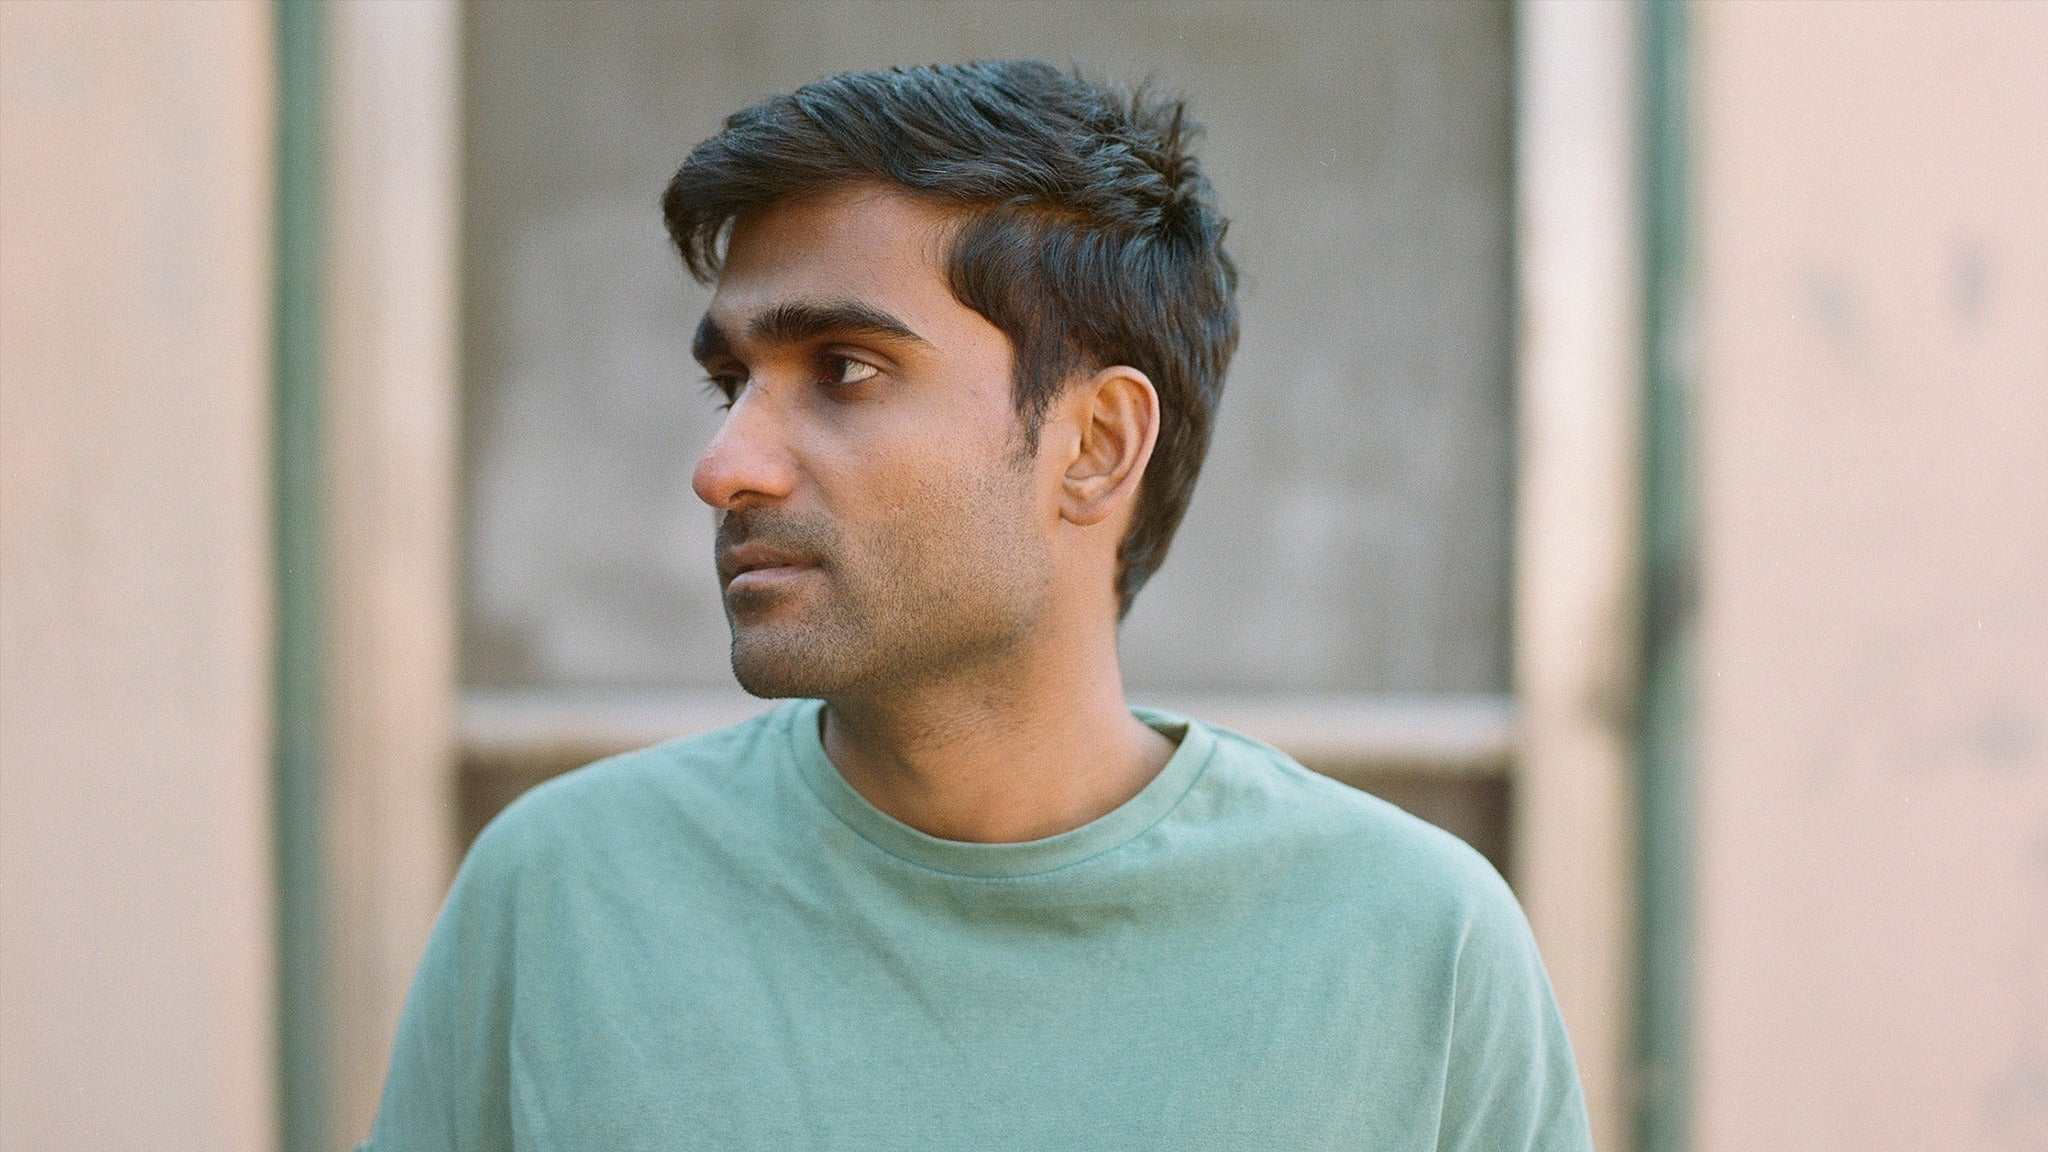 Prateek Kuhad pre-sale code for early tickets in New York